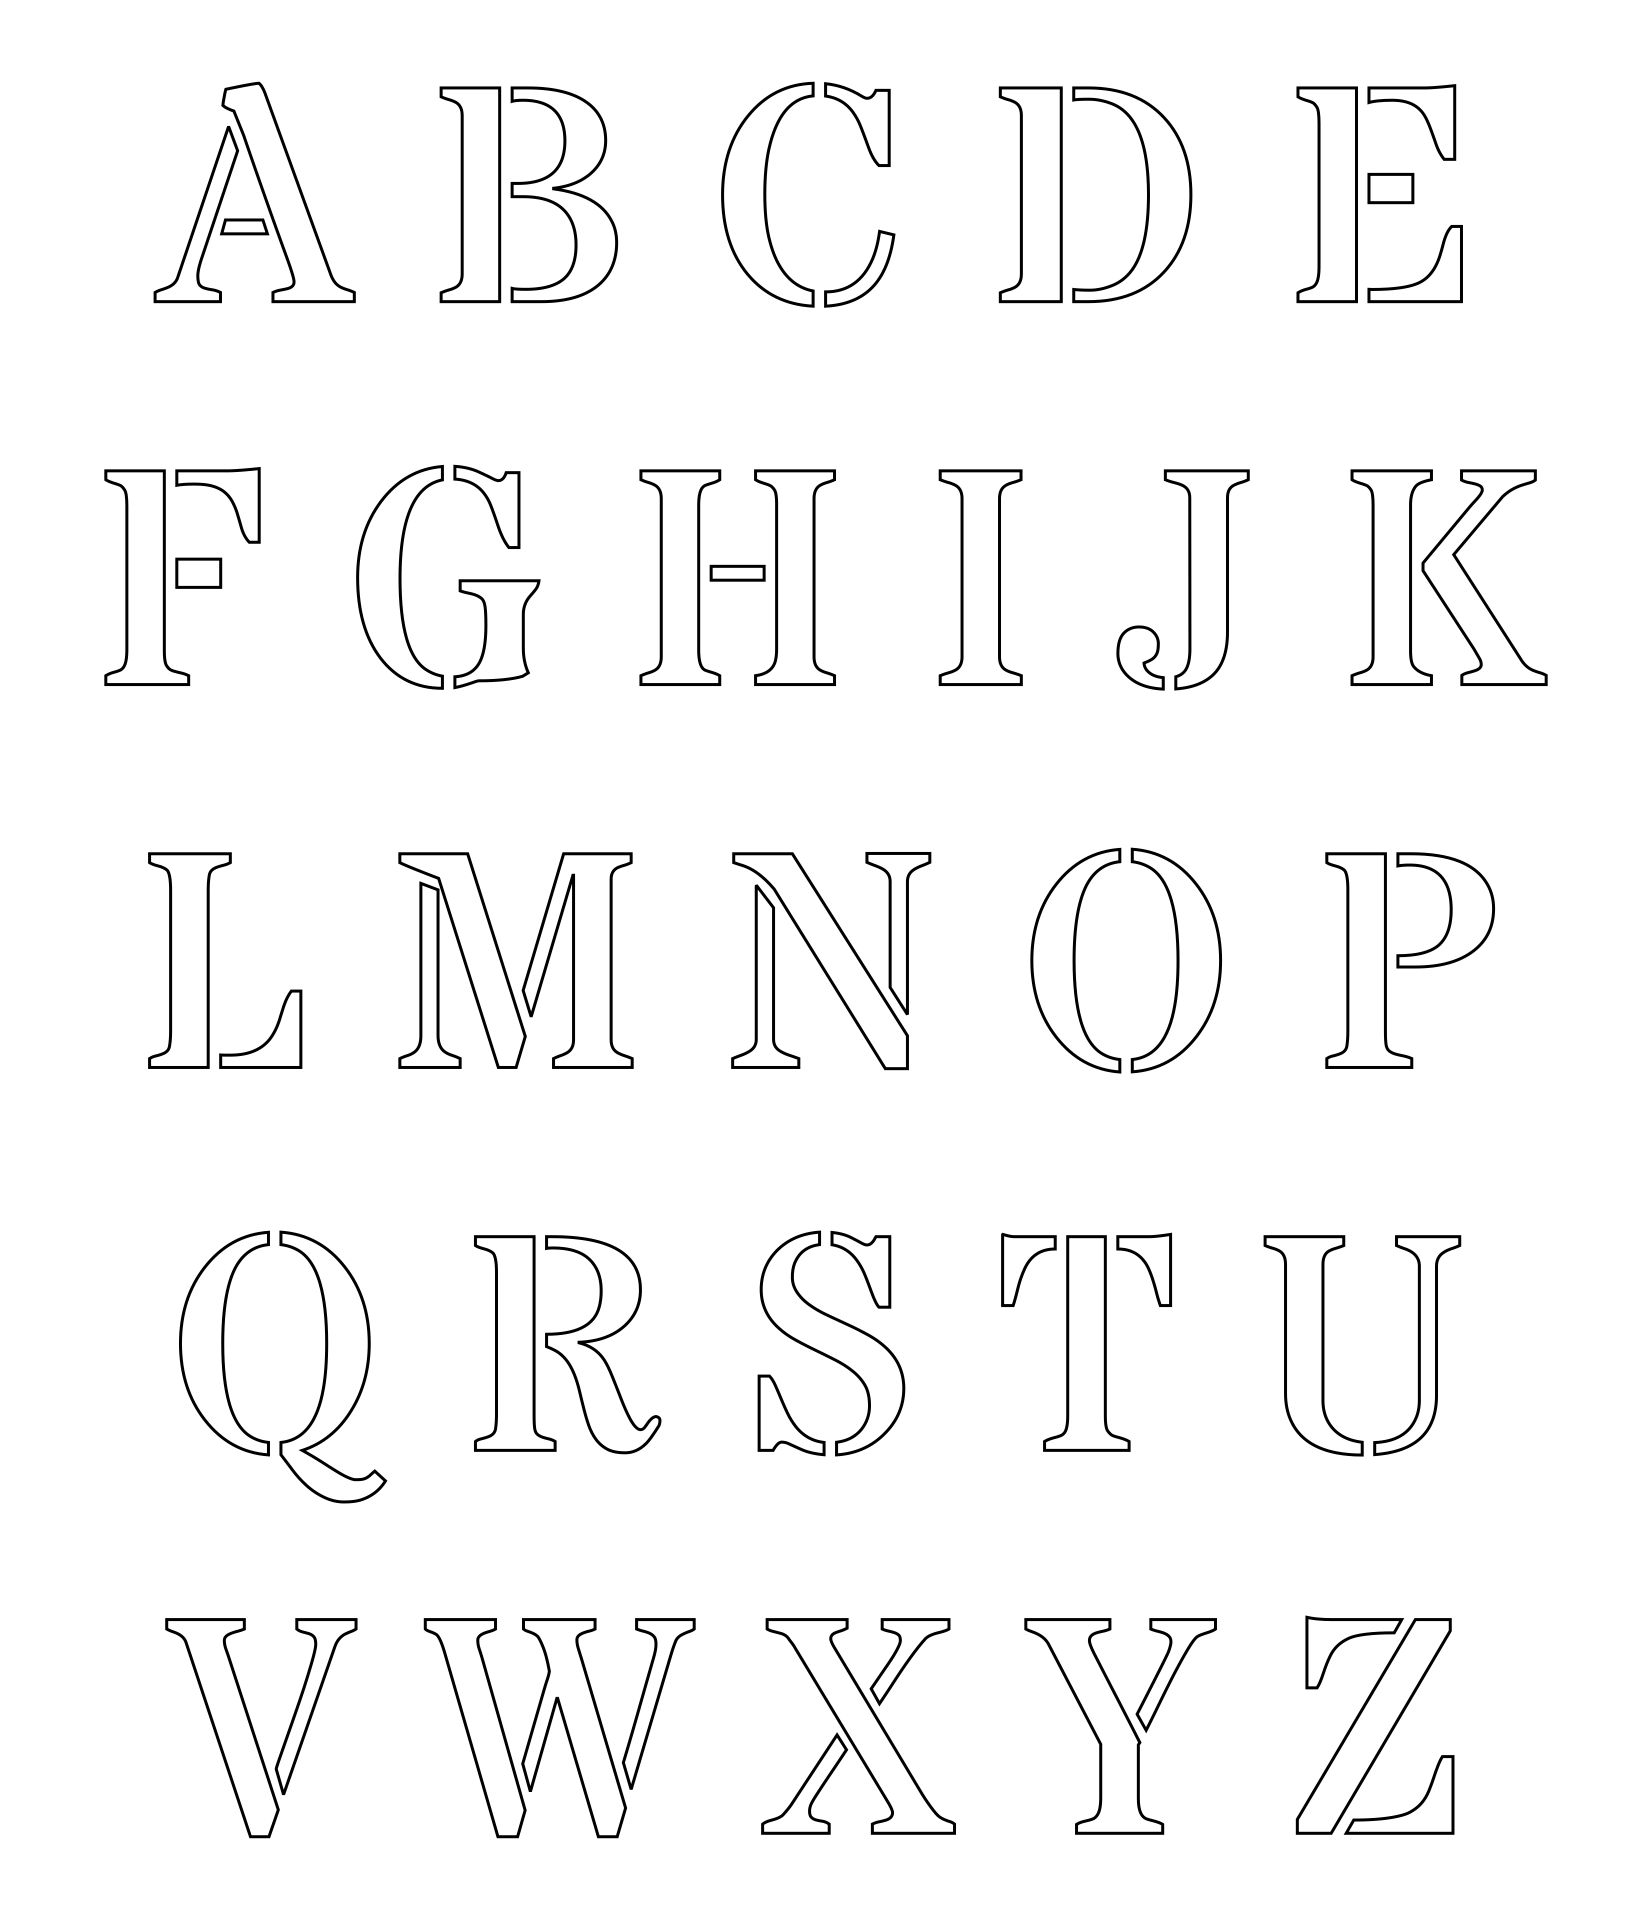 2 Inch Alphabet Letters Printable Template  Printable letter templates, Alphabet  letter templates, Free printable alphabet letters